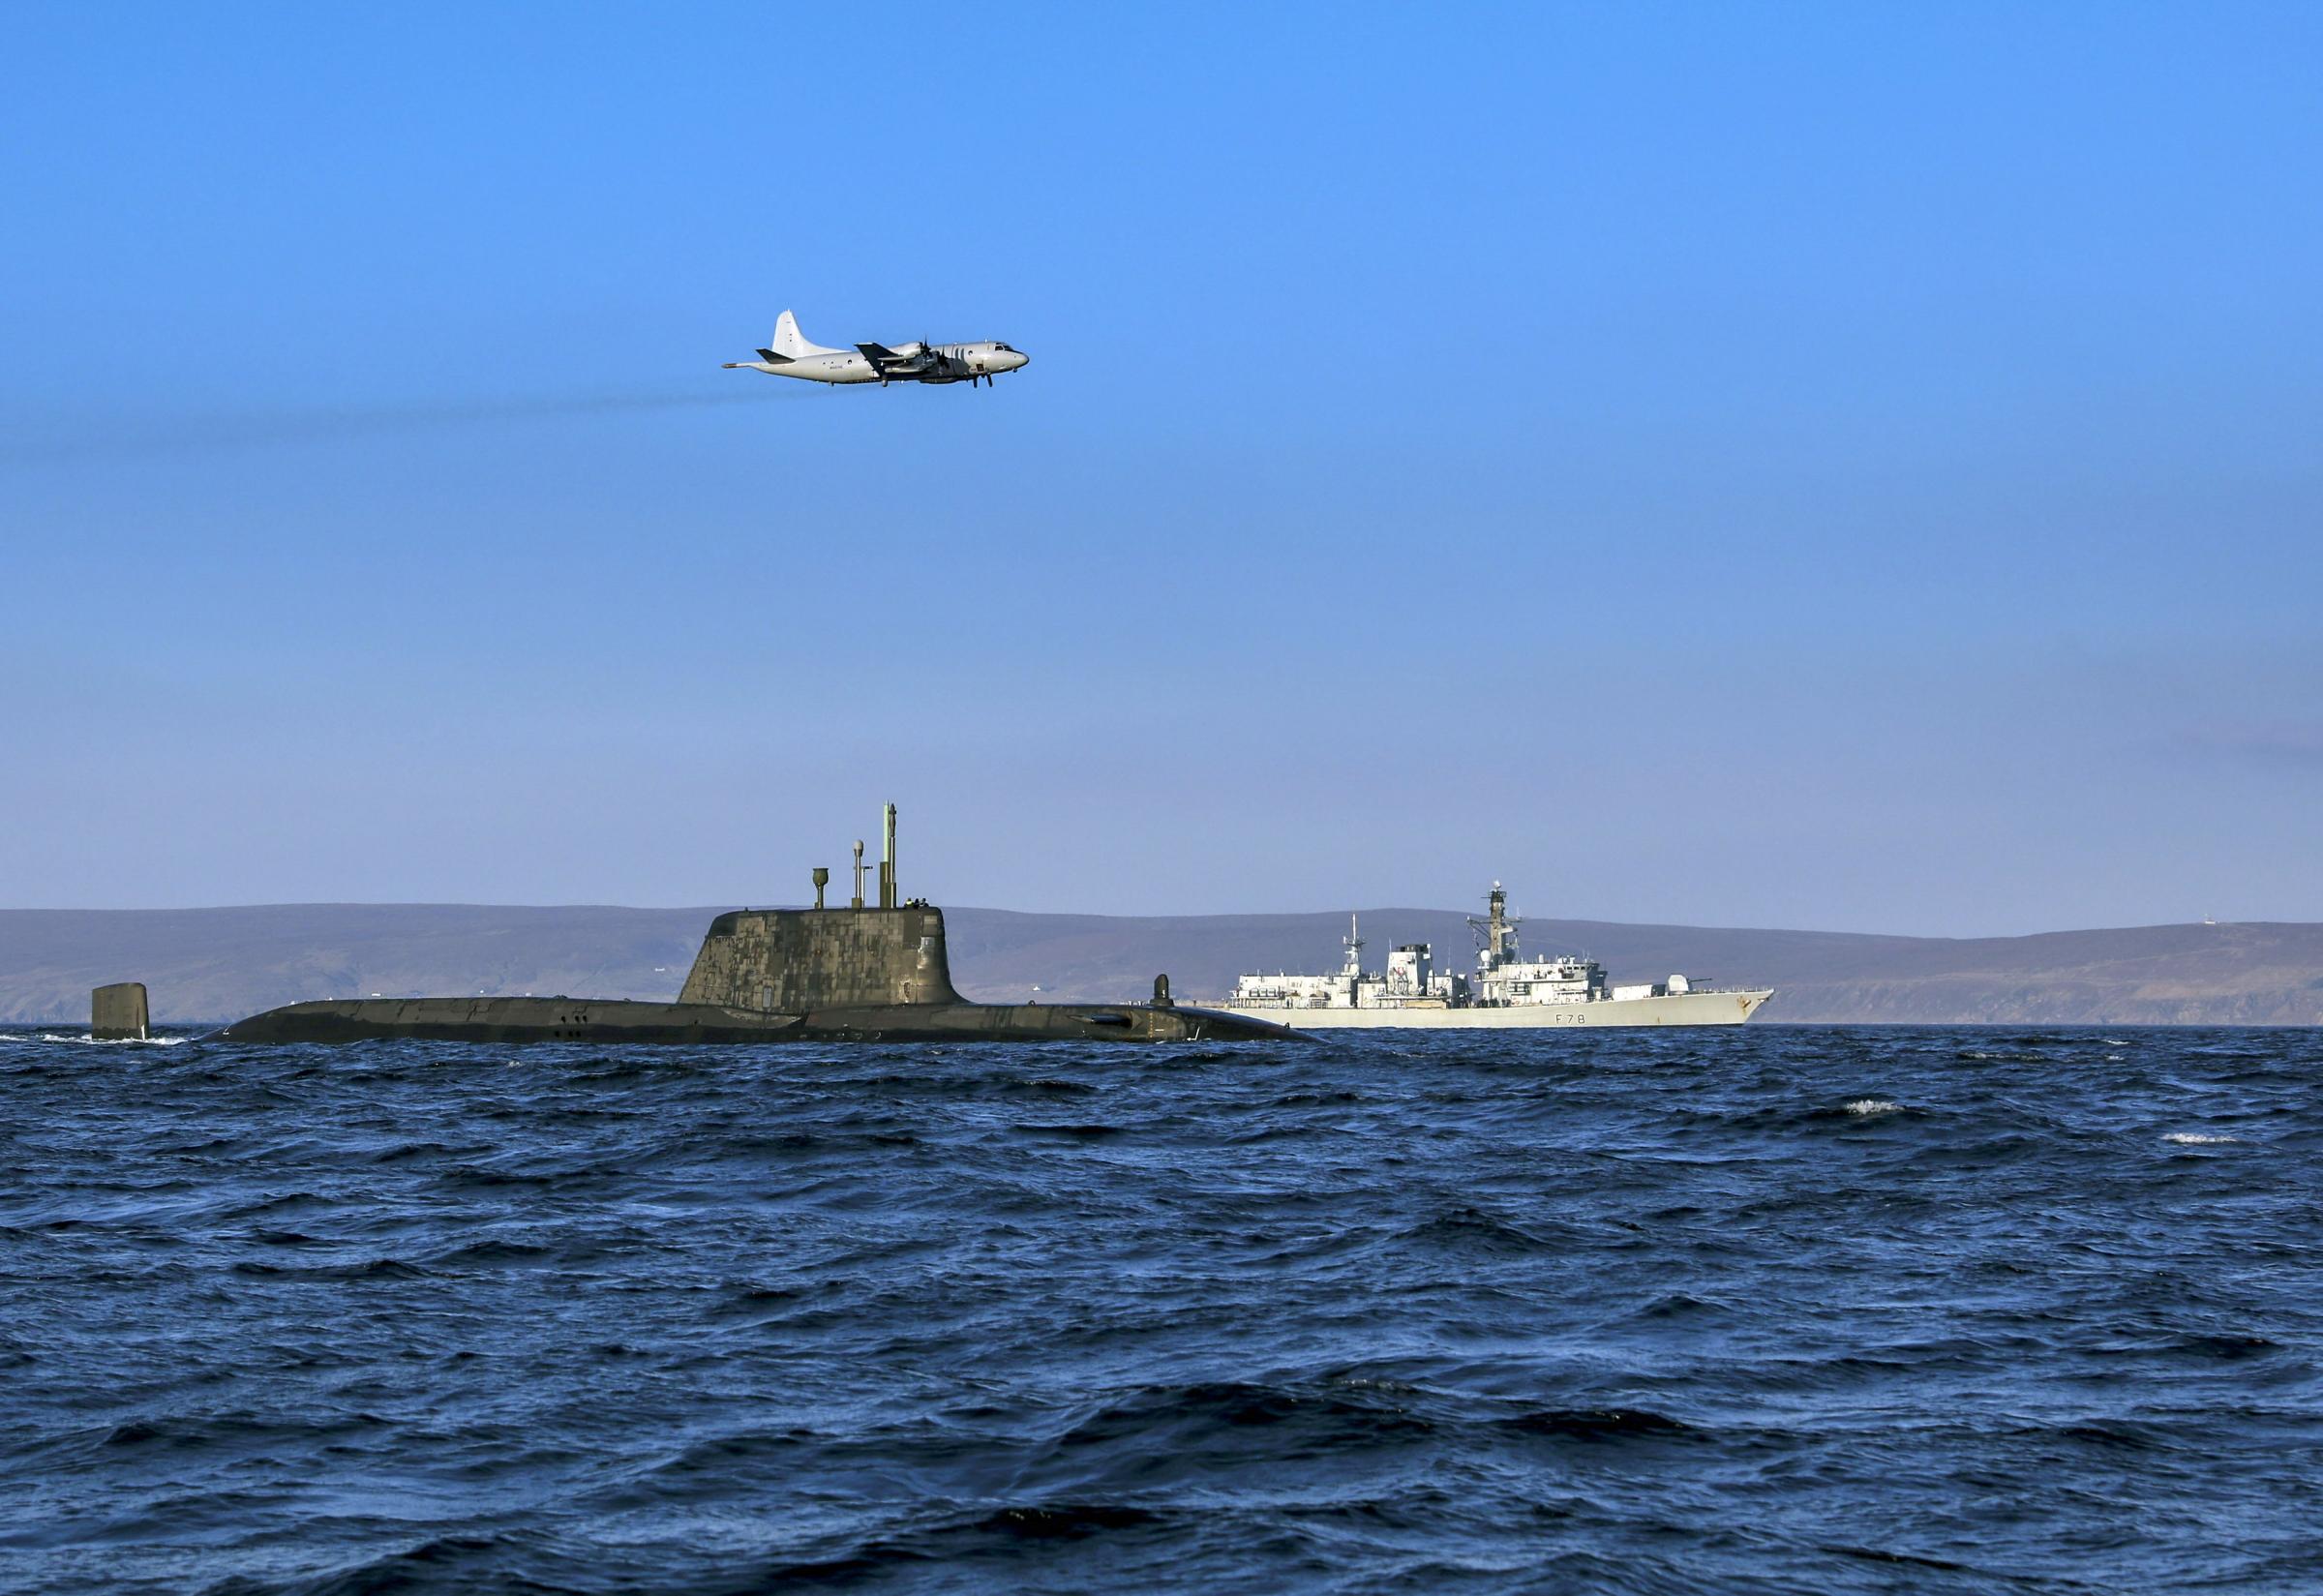 An Astute class nuclear submarine in company with the Type 23 frigate HMS Kent being over flown by a German Navy P3 maritime patrol aircraft during a previous NATO Joint Warrior exercise